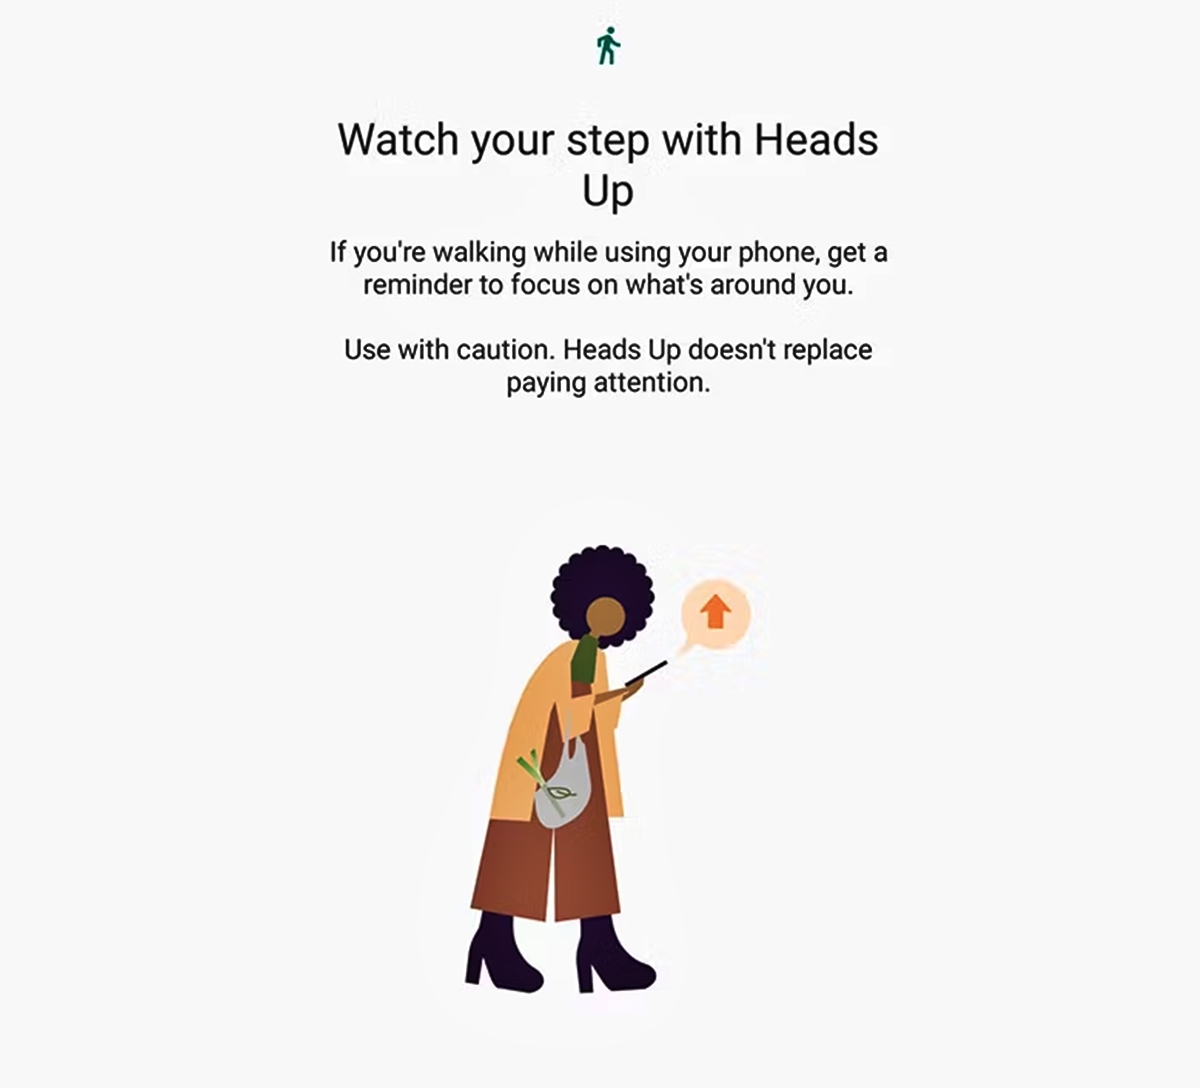 digital-wellbeing-heads-up-mode-is-now-available-on-more-android-phones